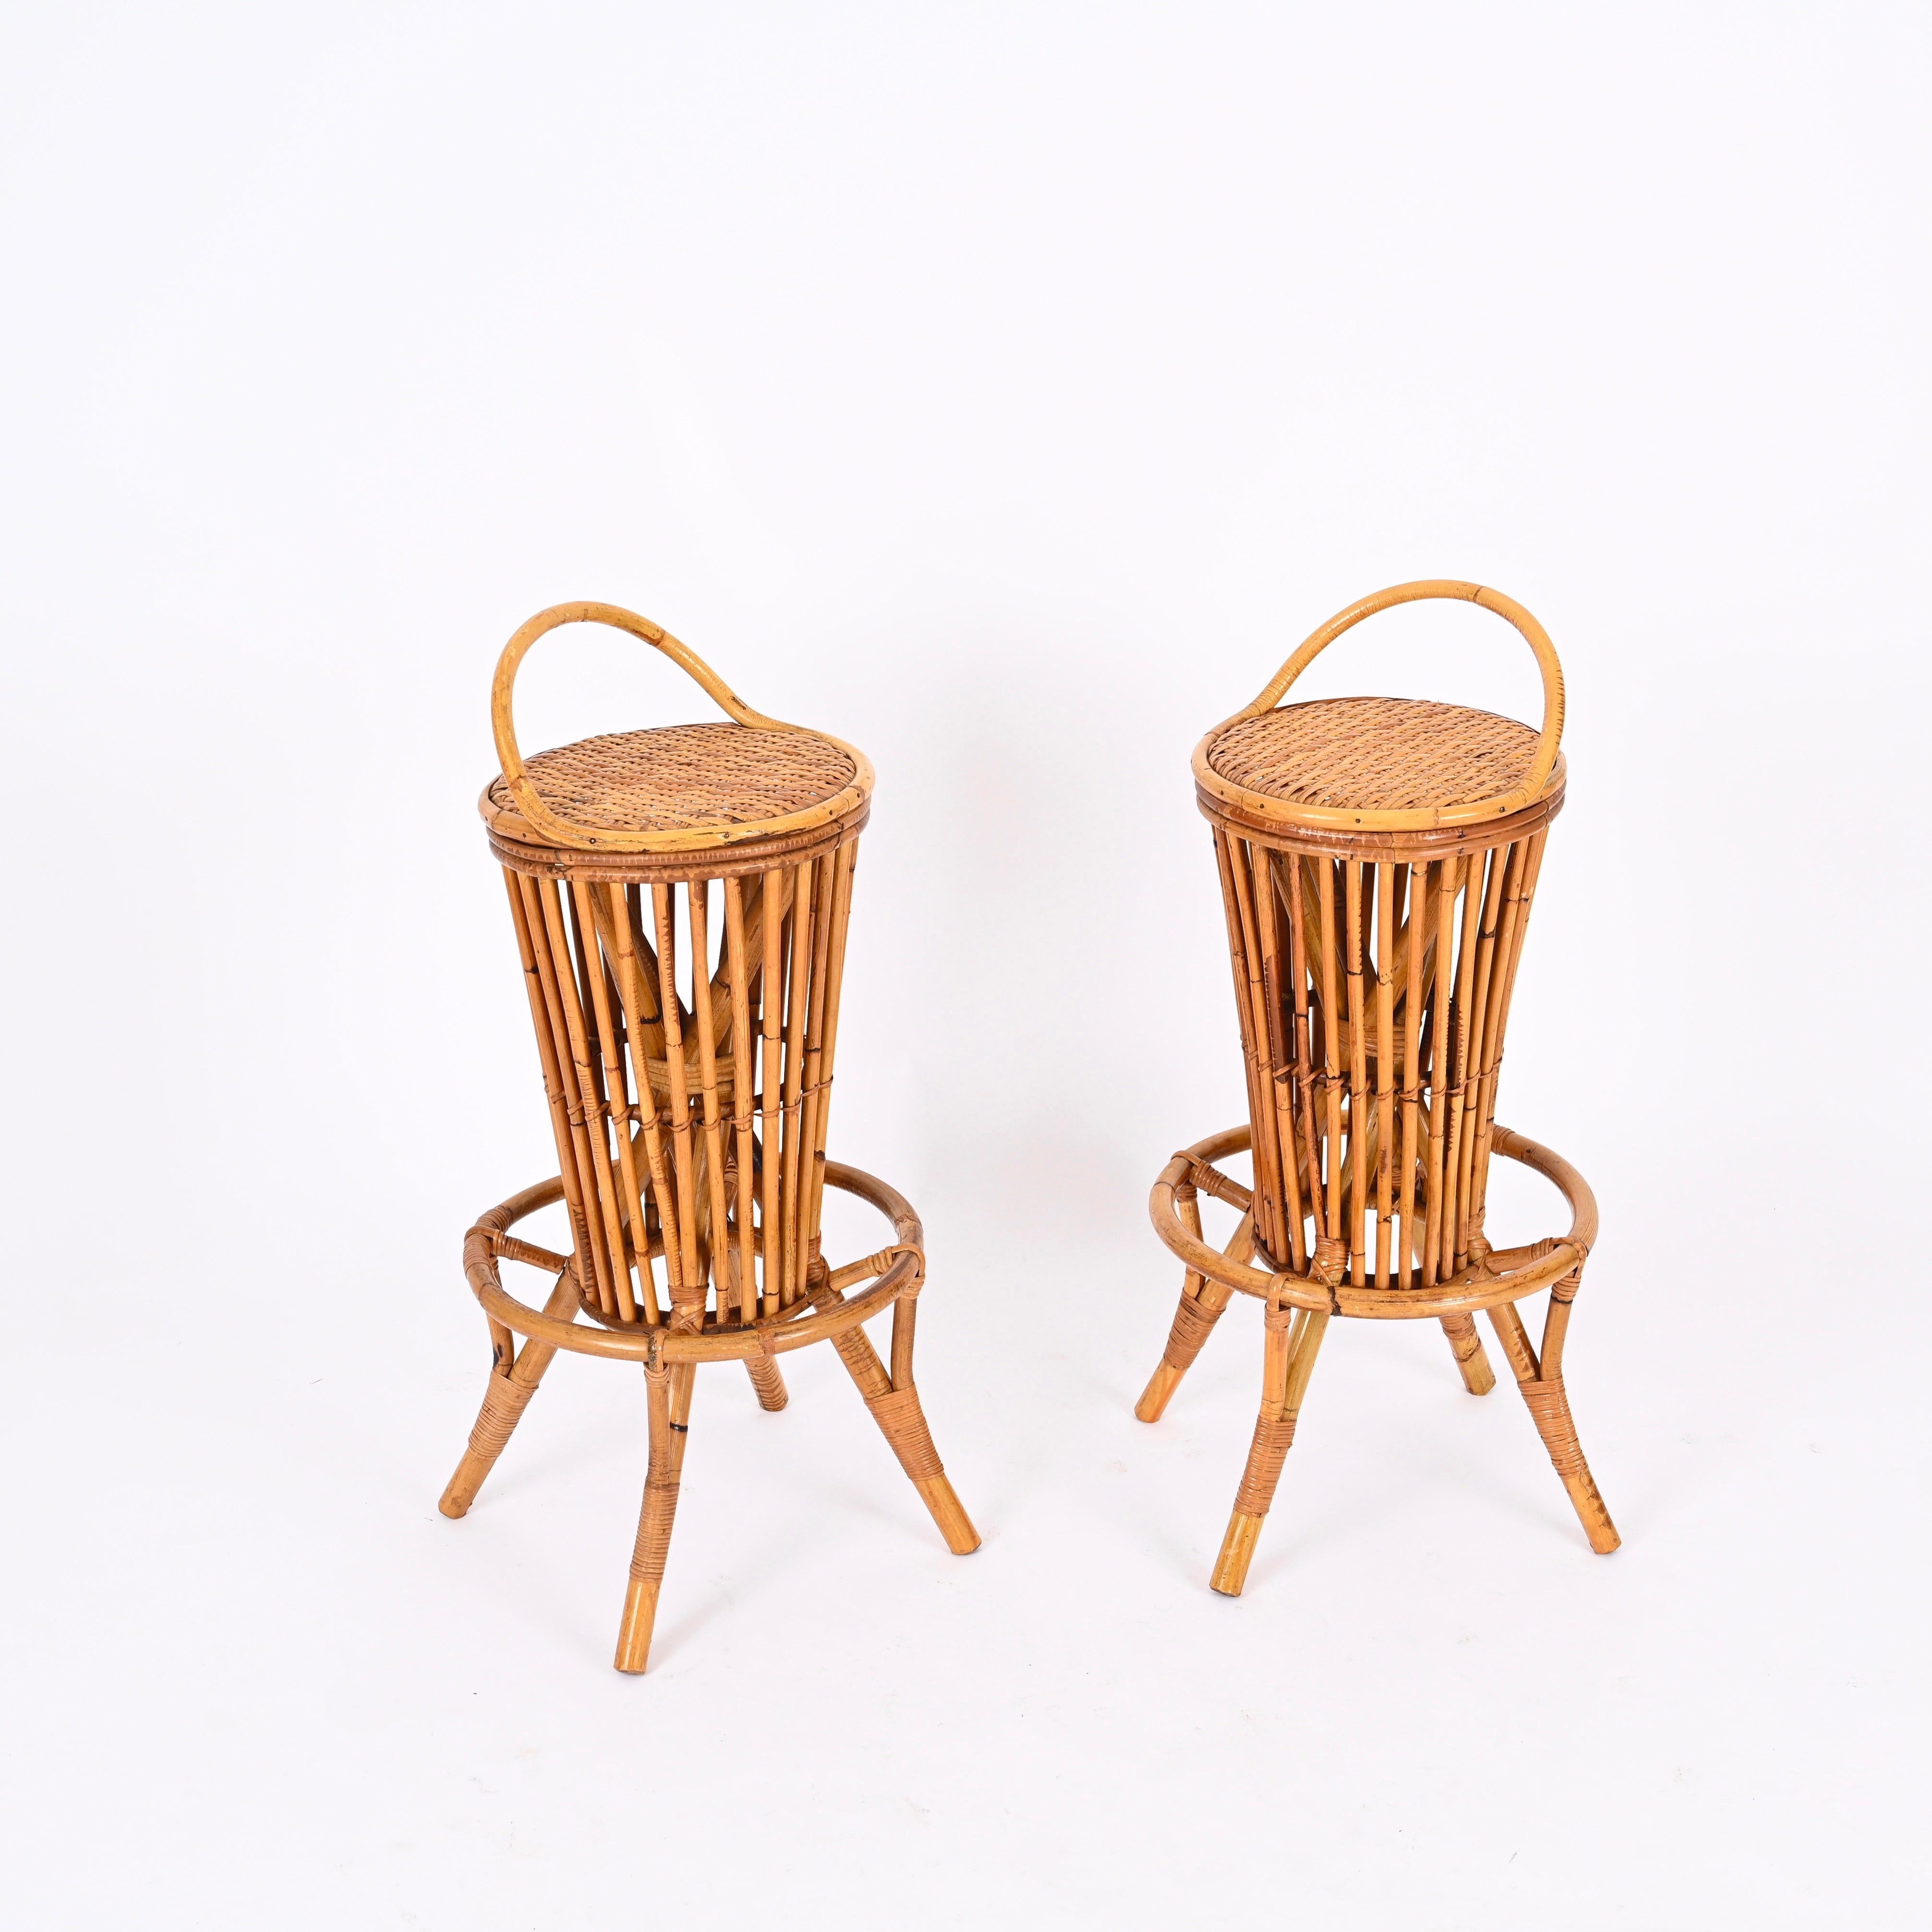 Dry Bar with Two Stools in Rattan, Bamboo and Wicker by Tito Agnoli, Italy 1950s For Sale 8